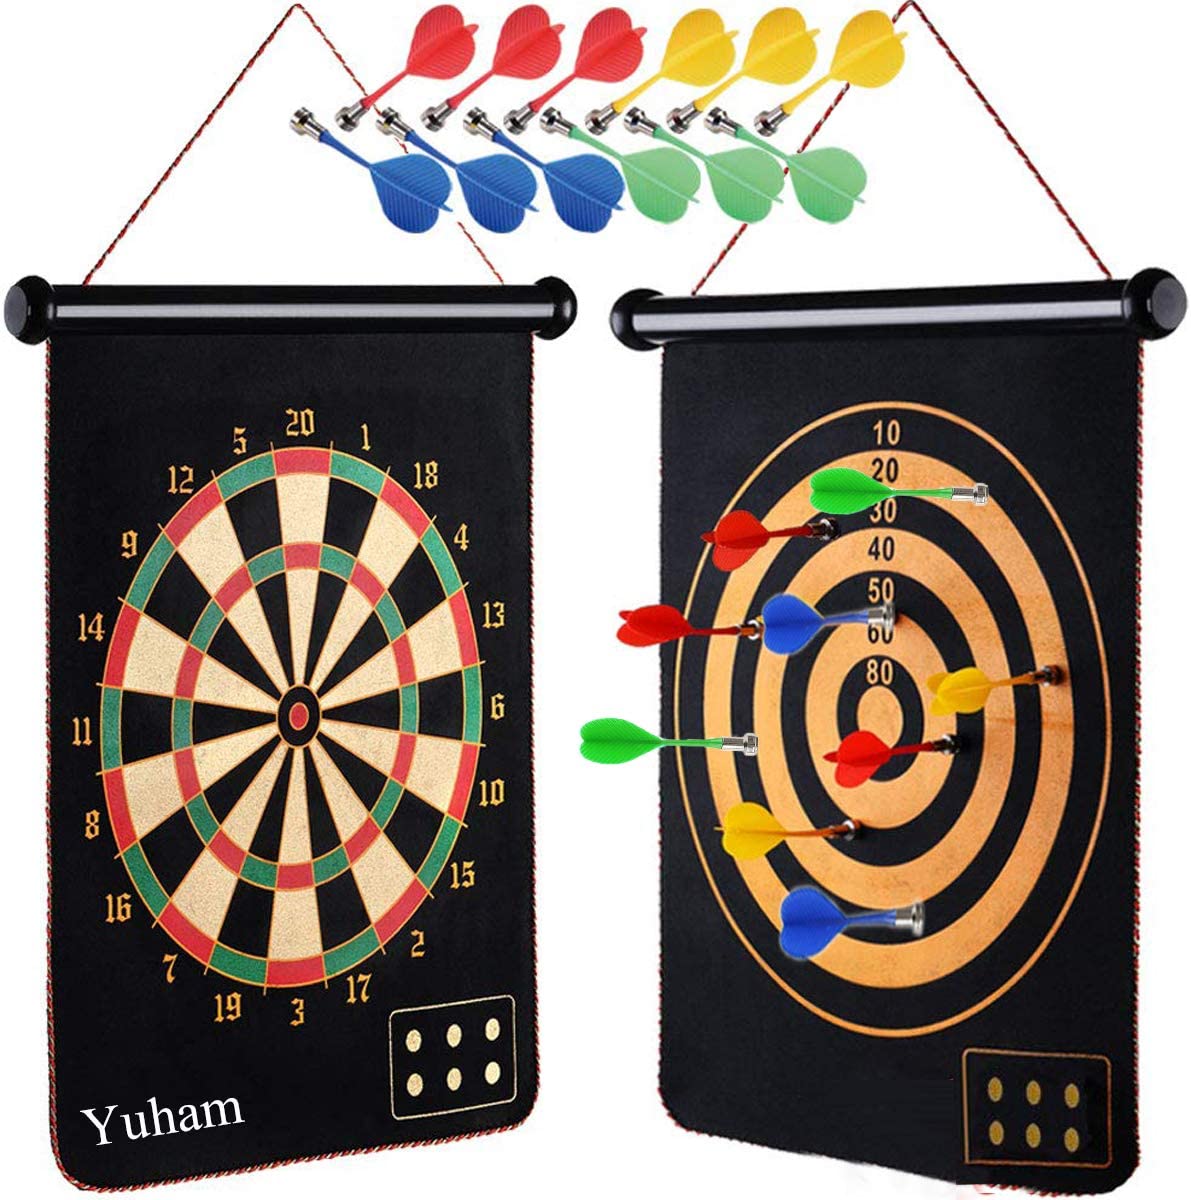 Yuham Reversible Board Magnetic Dart Game For Adults